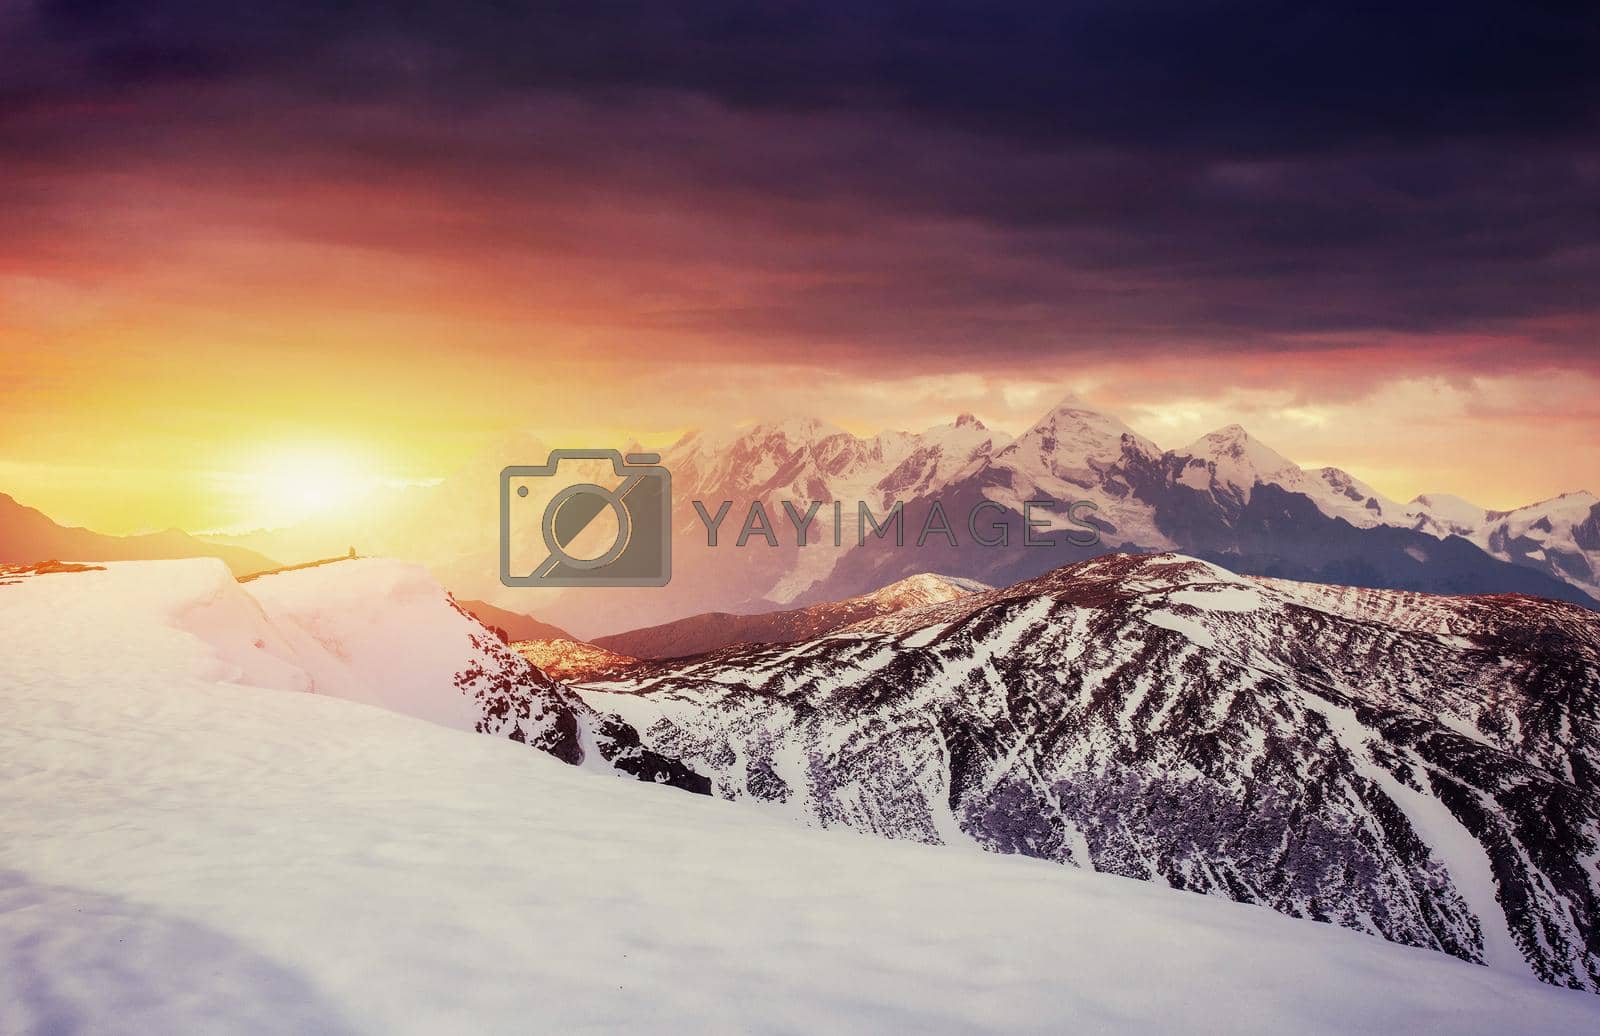 Royalty free image of magical winter snow covered tree. Sunset in the Carpathians. Ukr by Standret